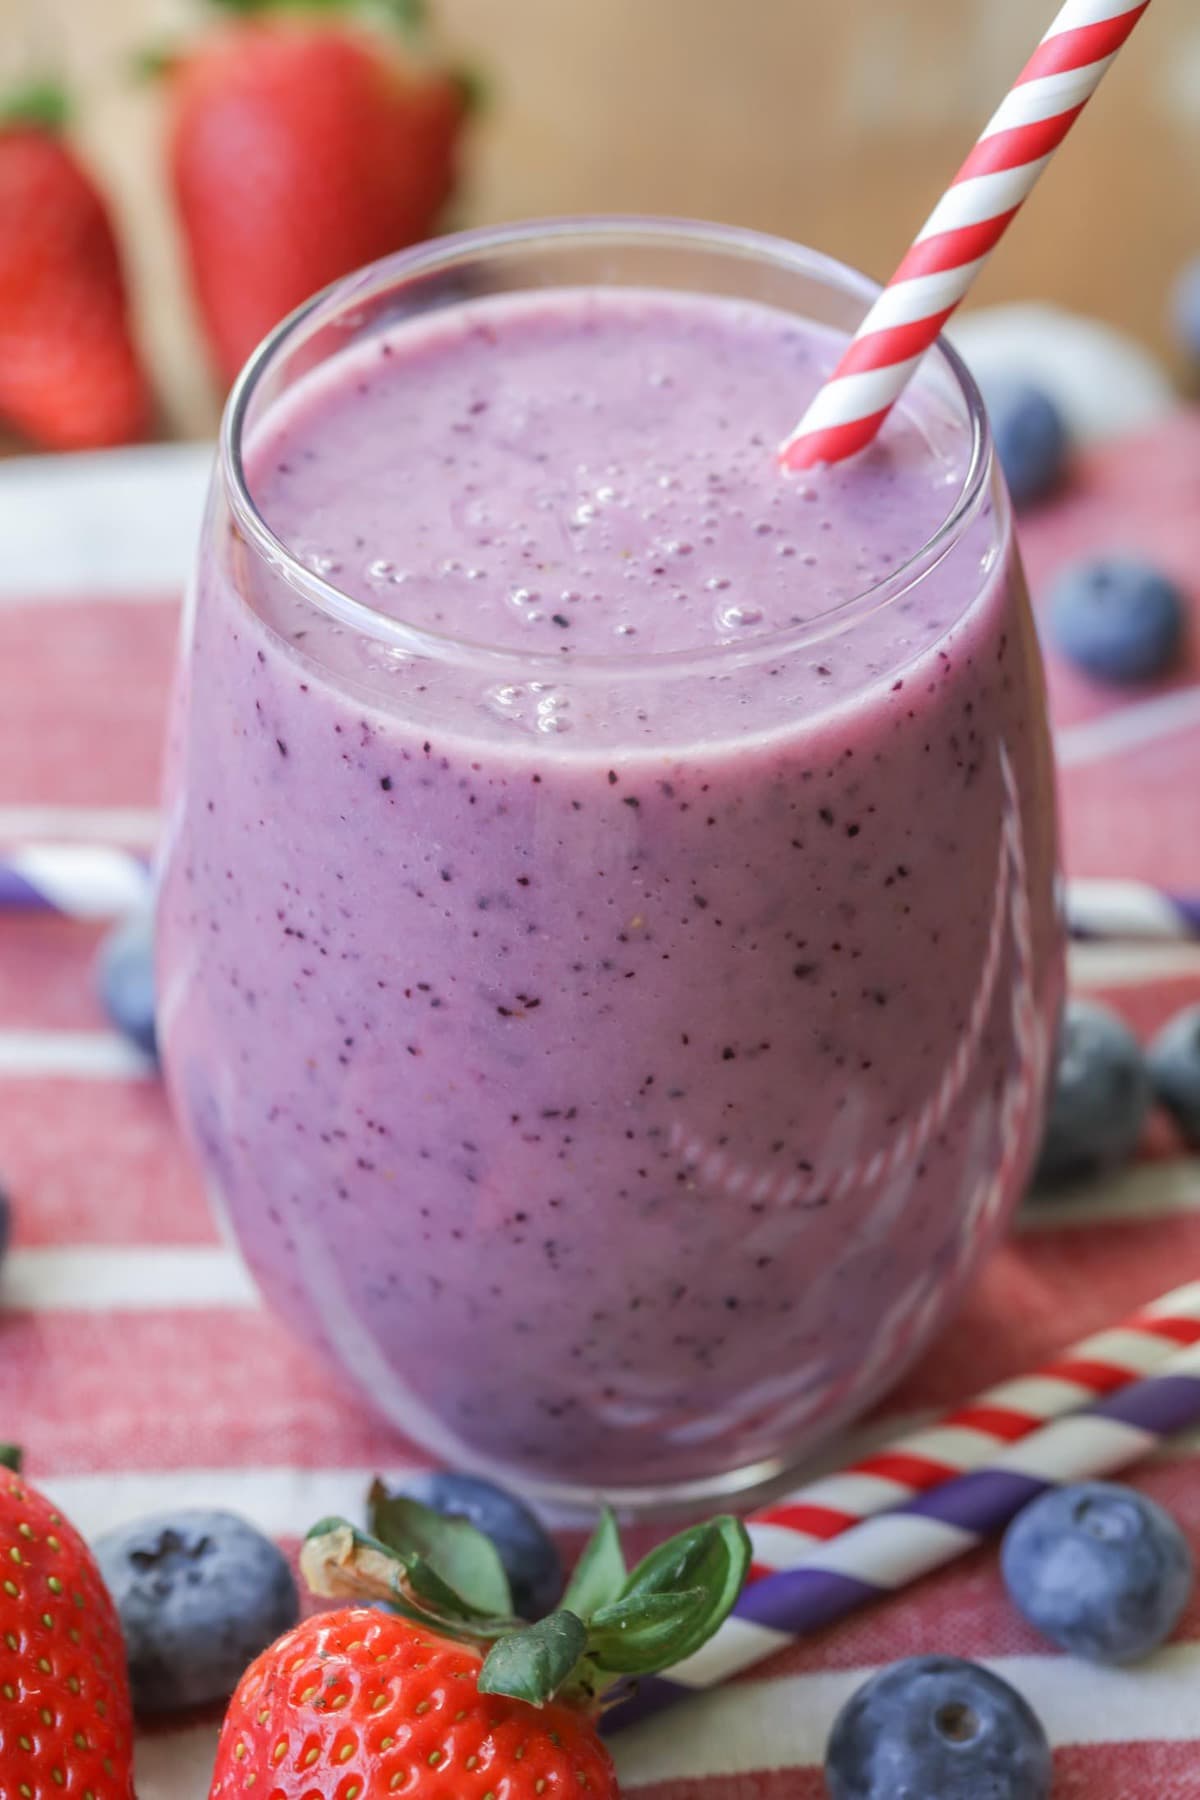 Blueberry Smoothie with straw